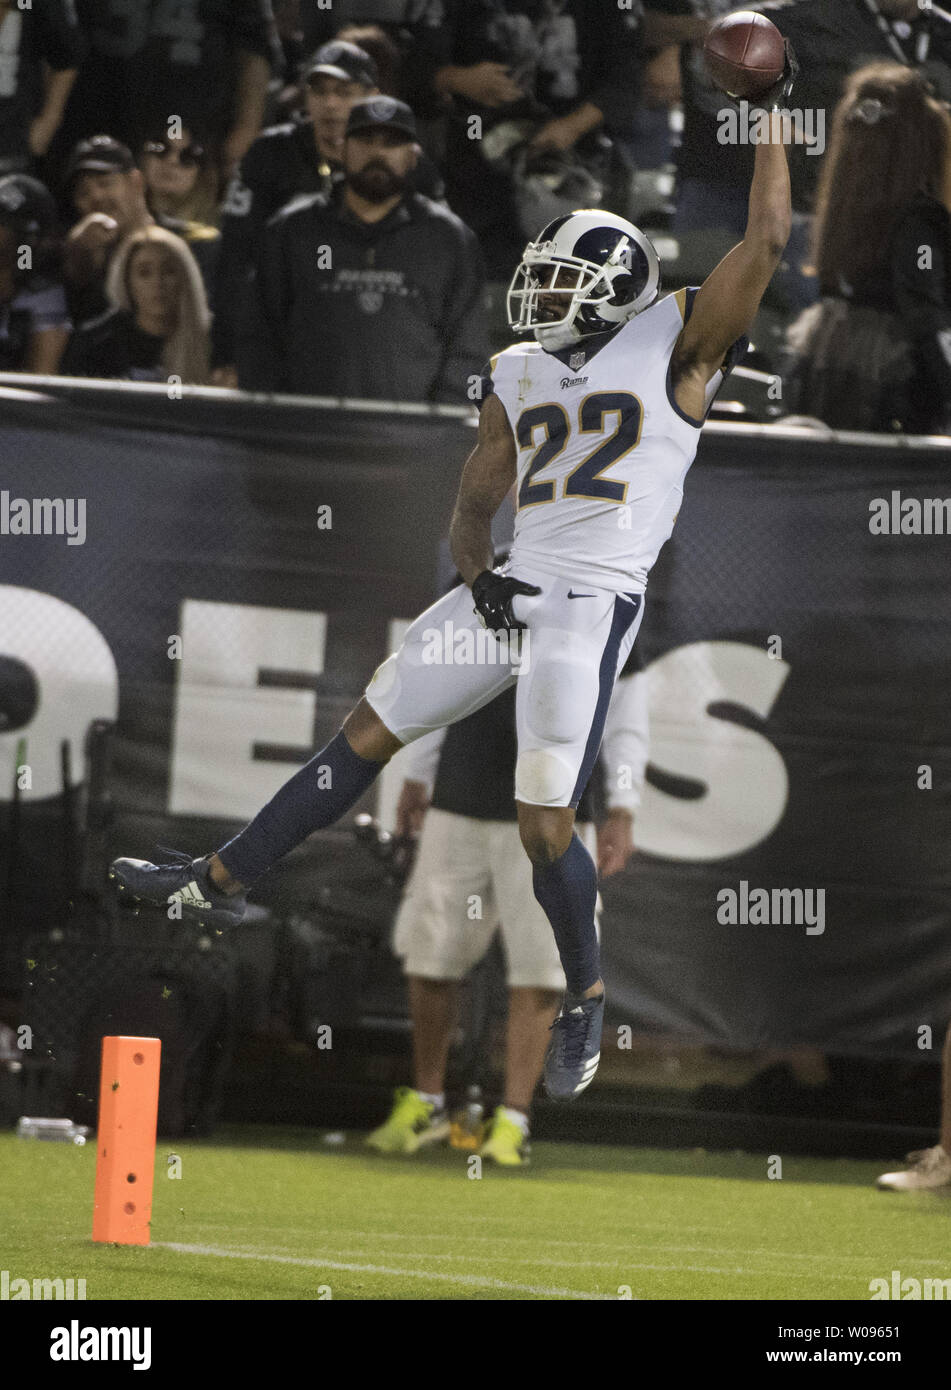 Los Angeles Rams Marcus Peters (22) leaps backwards across the goal line while grabbing his crotch to celebrate a pick 6 against Oakland Raiders QB Derek Carr in the fourth quarter at the Coliseum in Oakland, California on Monday, September 10, 2018. The Rams defeated the Raiders 33-13.       Photo by Terry Schmitt/UPI Stock Photo